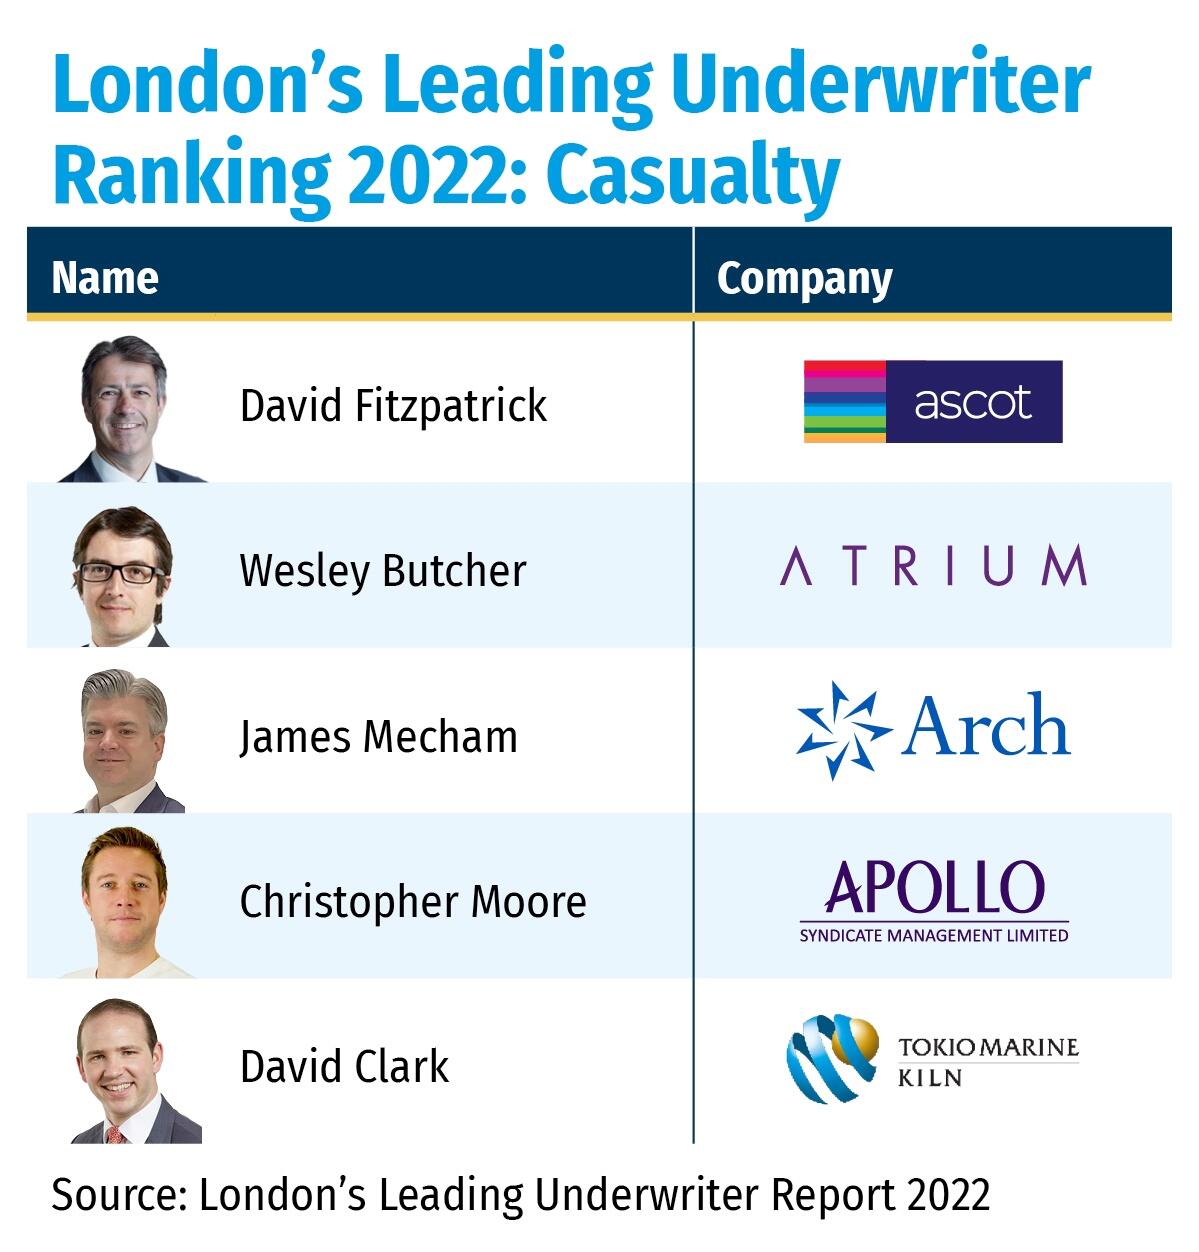 London’s Leading Underwriter Ranking 2022- Casualty